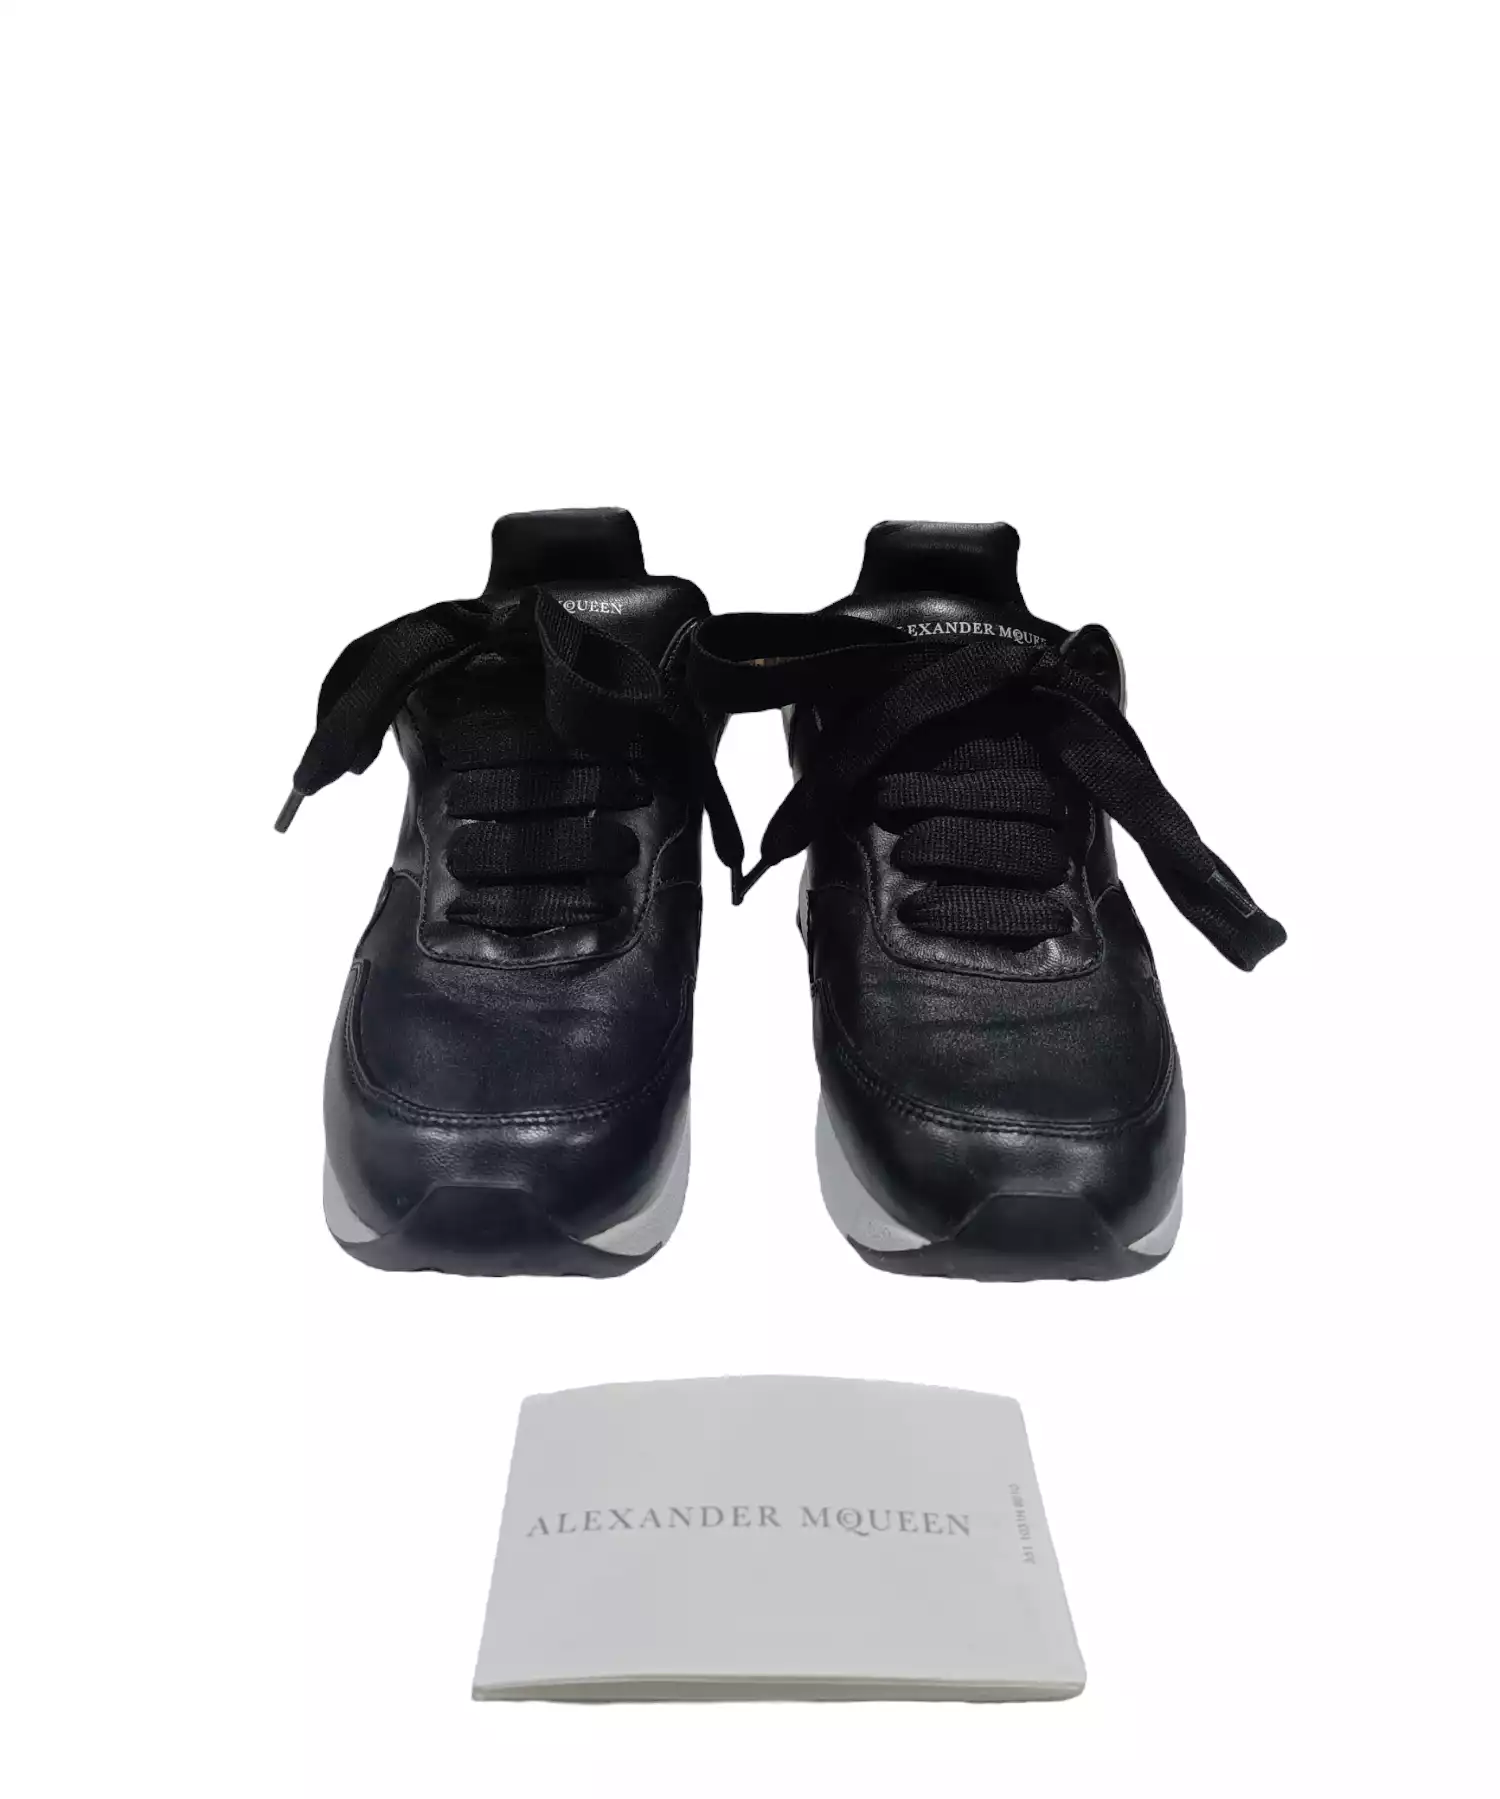 Shoes by Alexander Mcqueen